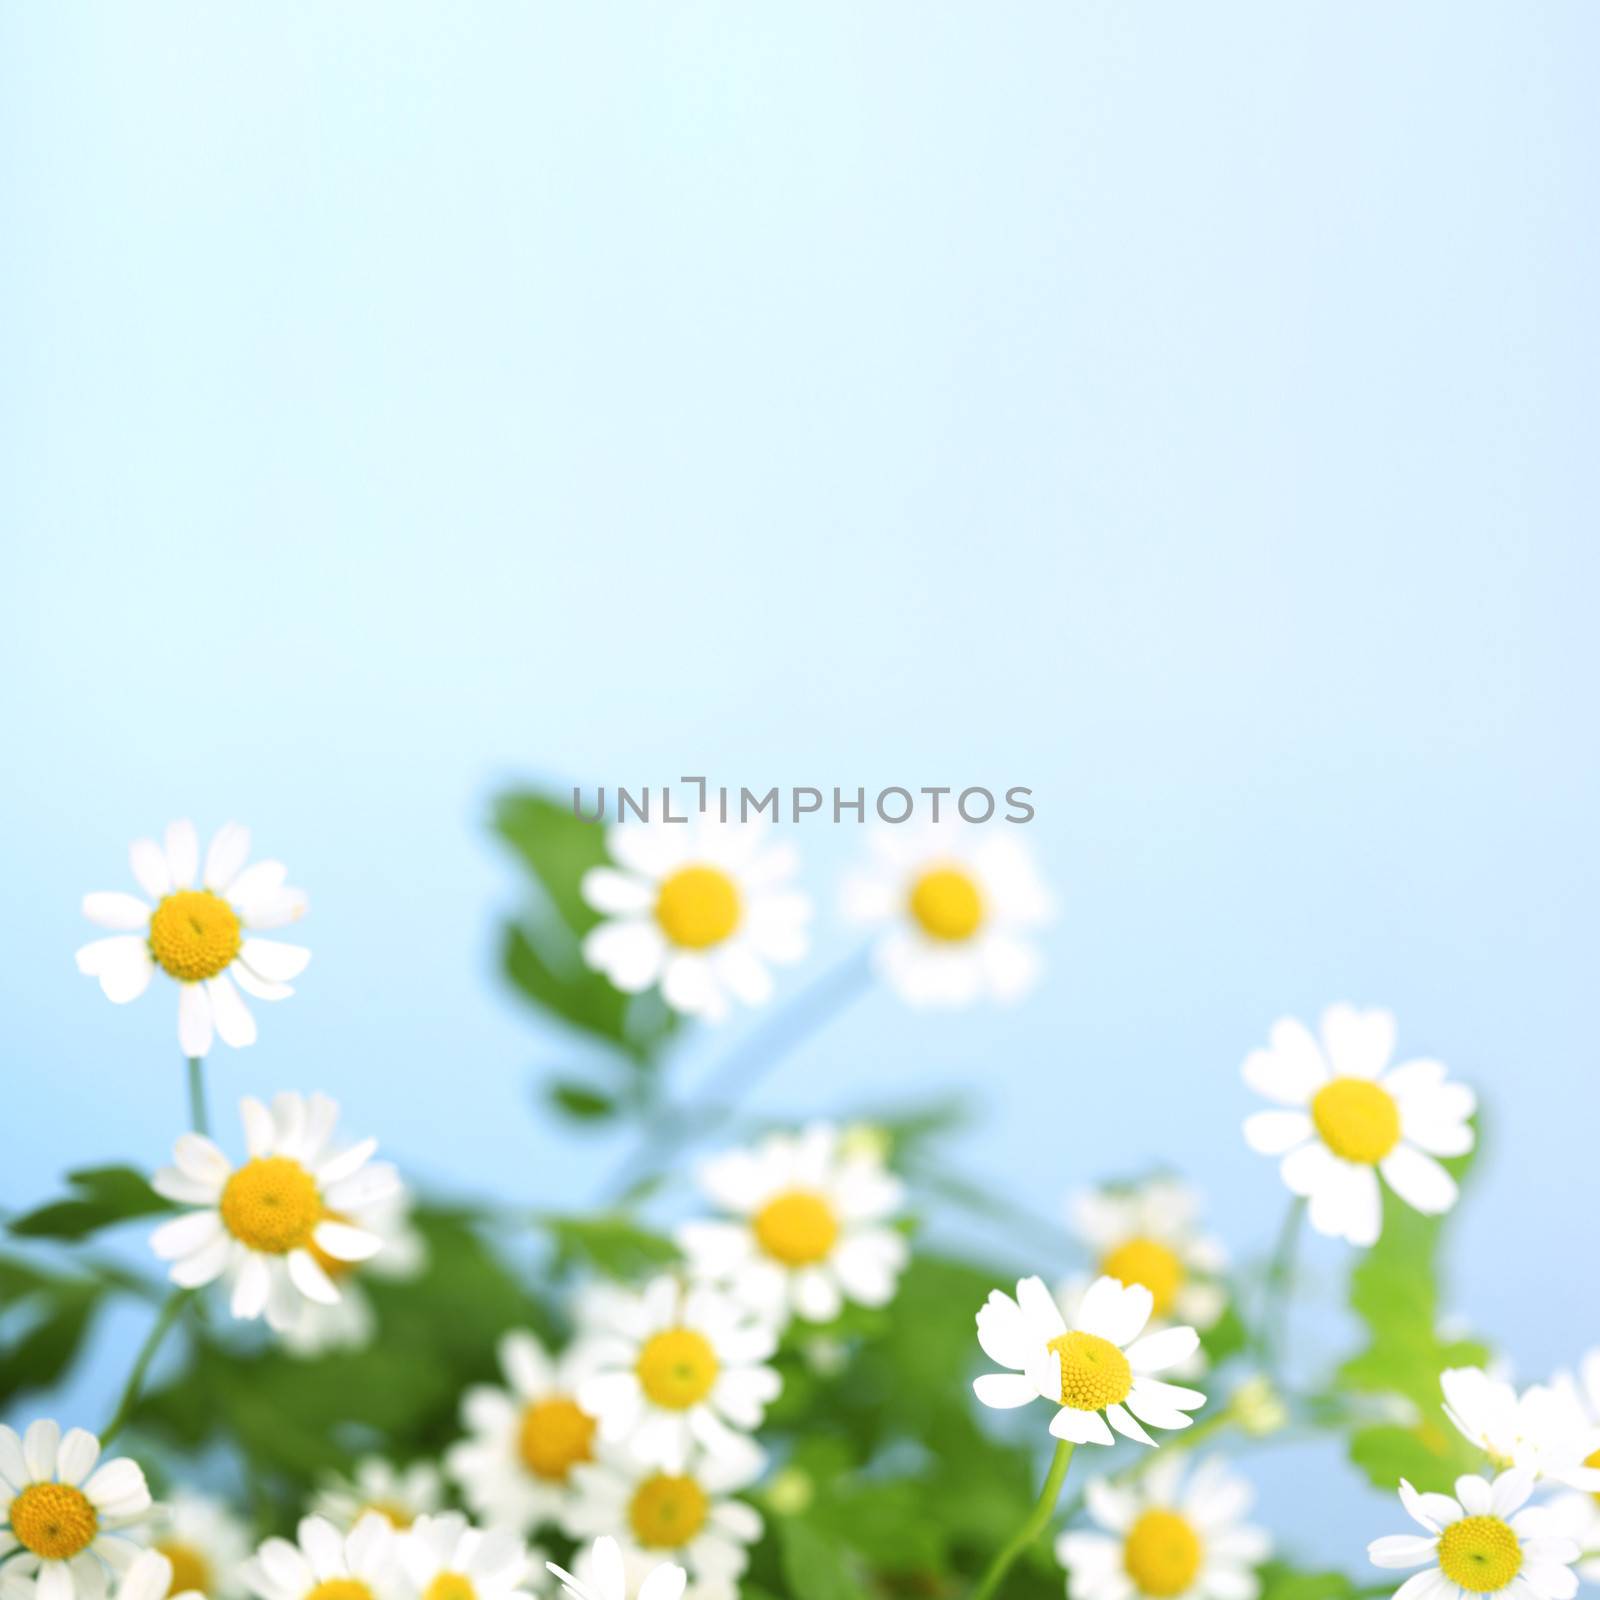 White daisies over blue sky background